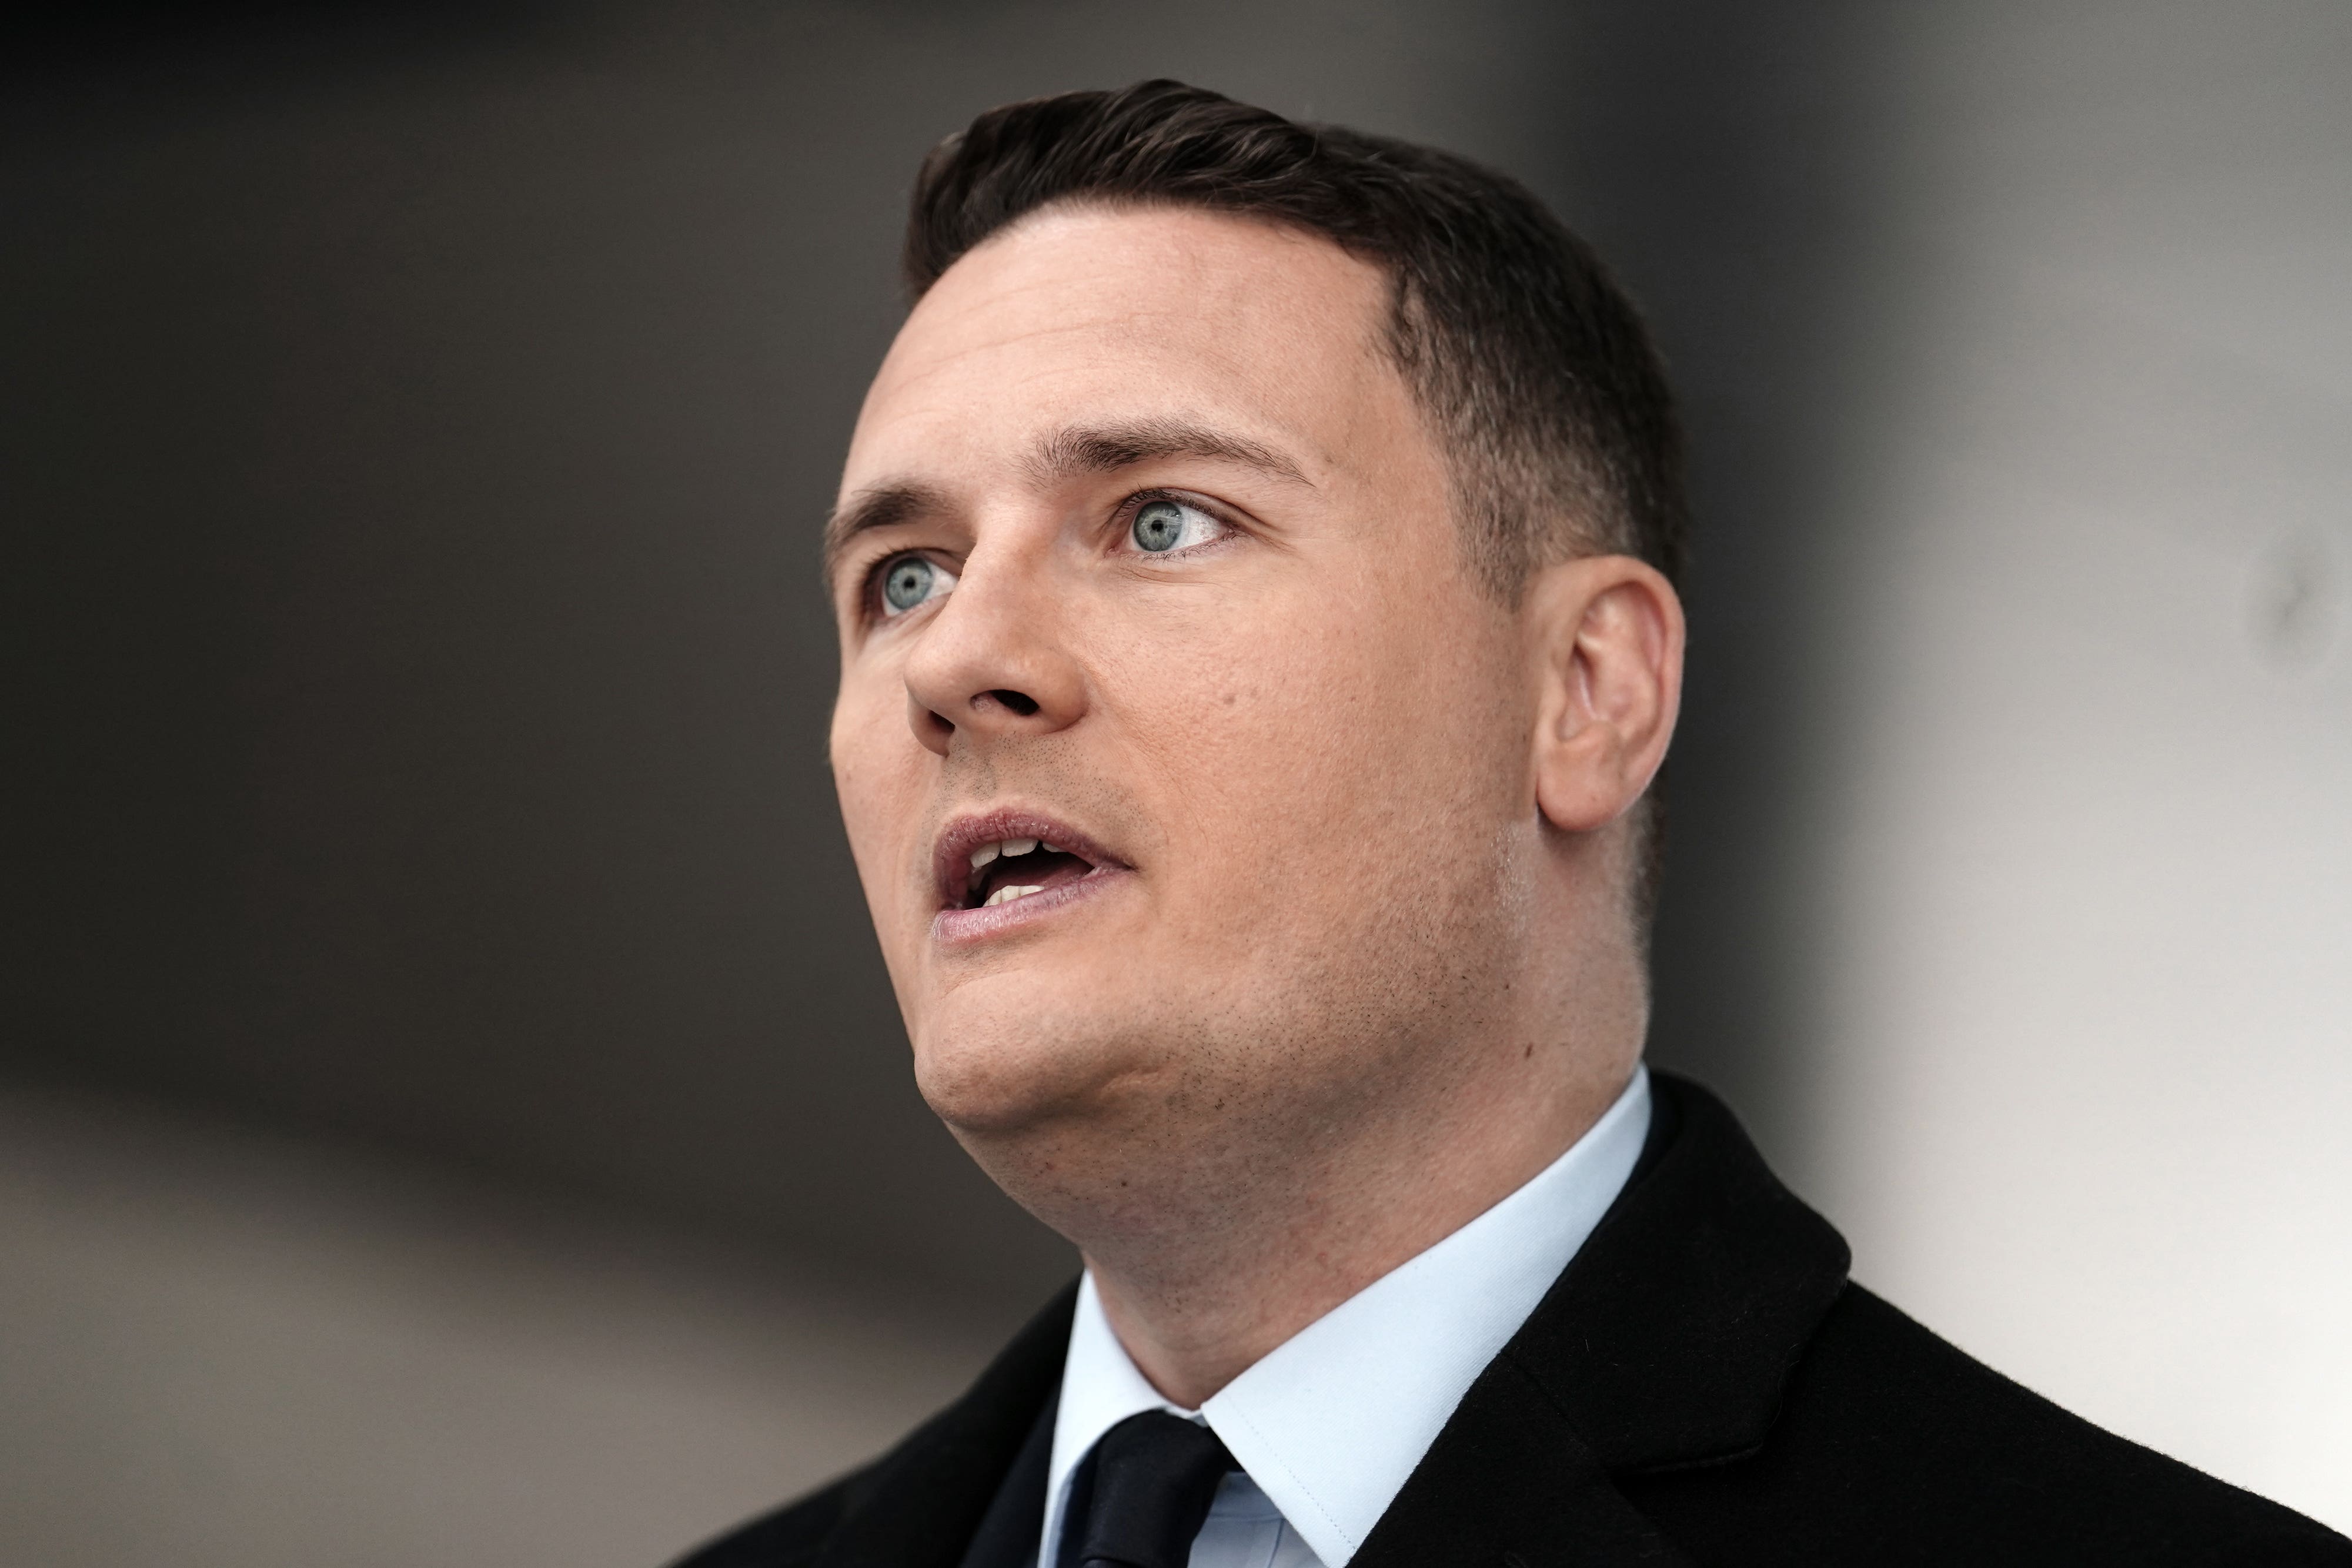 Wes Streeting says that ‘every second counts’ when it comes to cancer